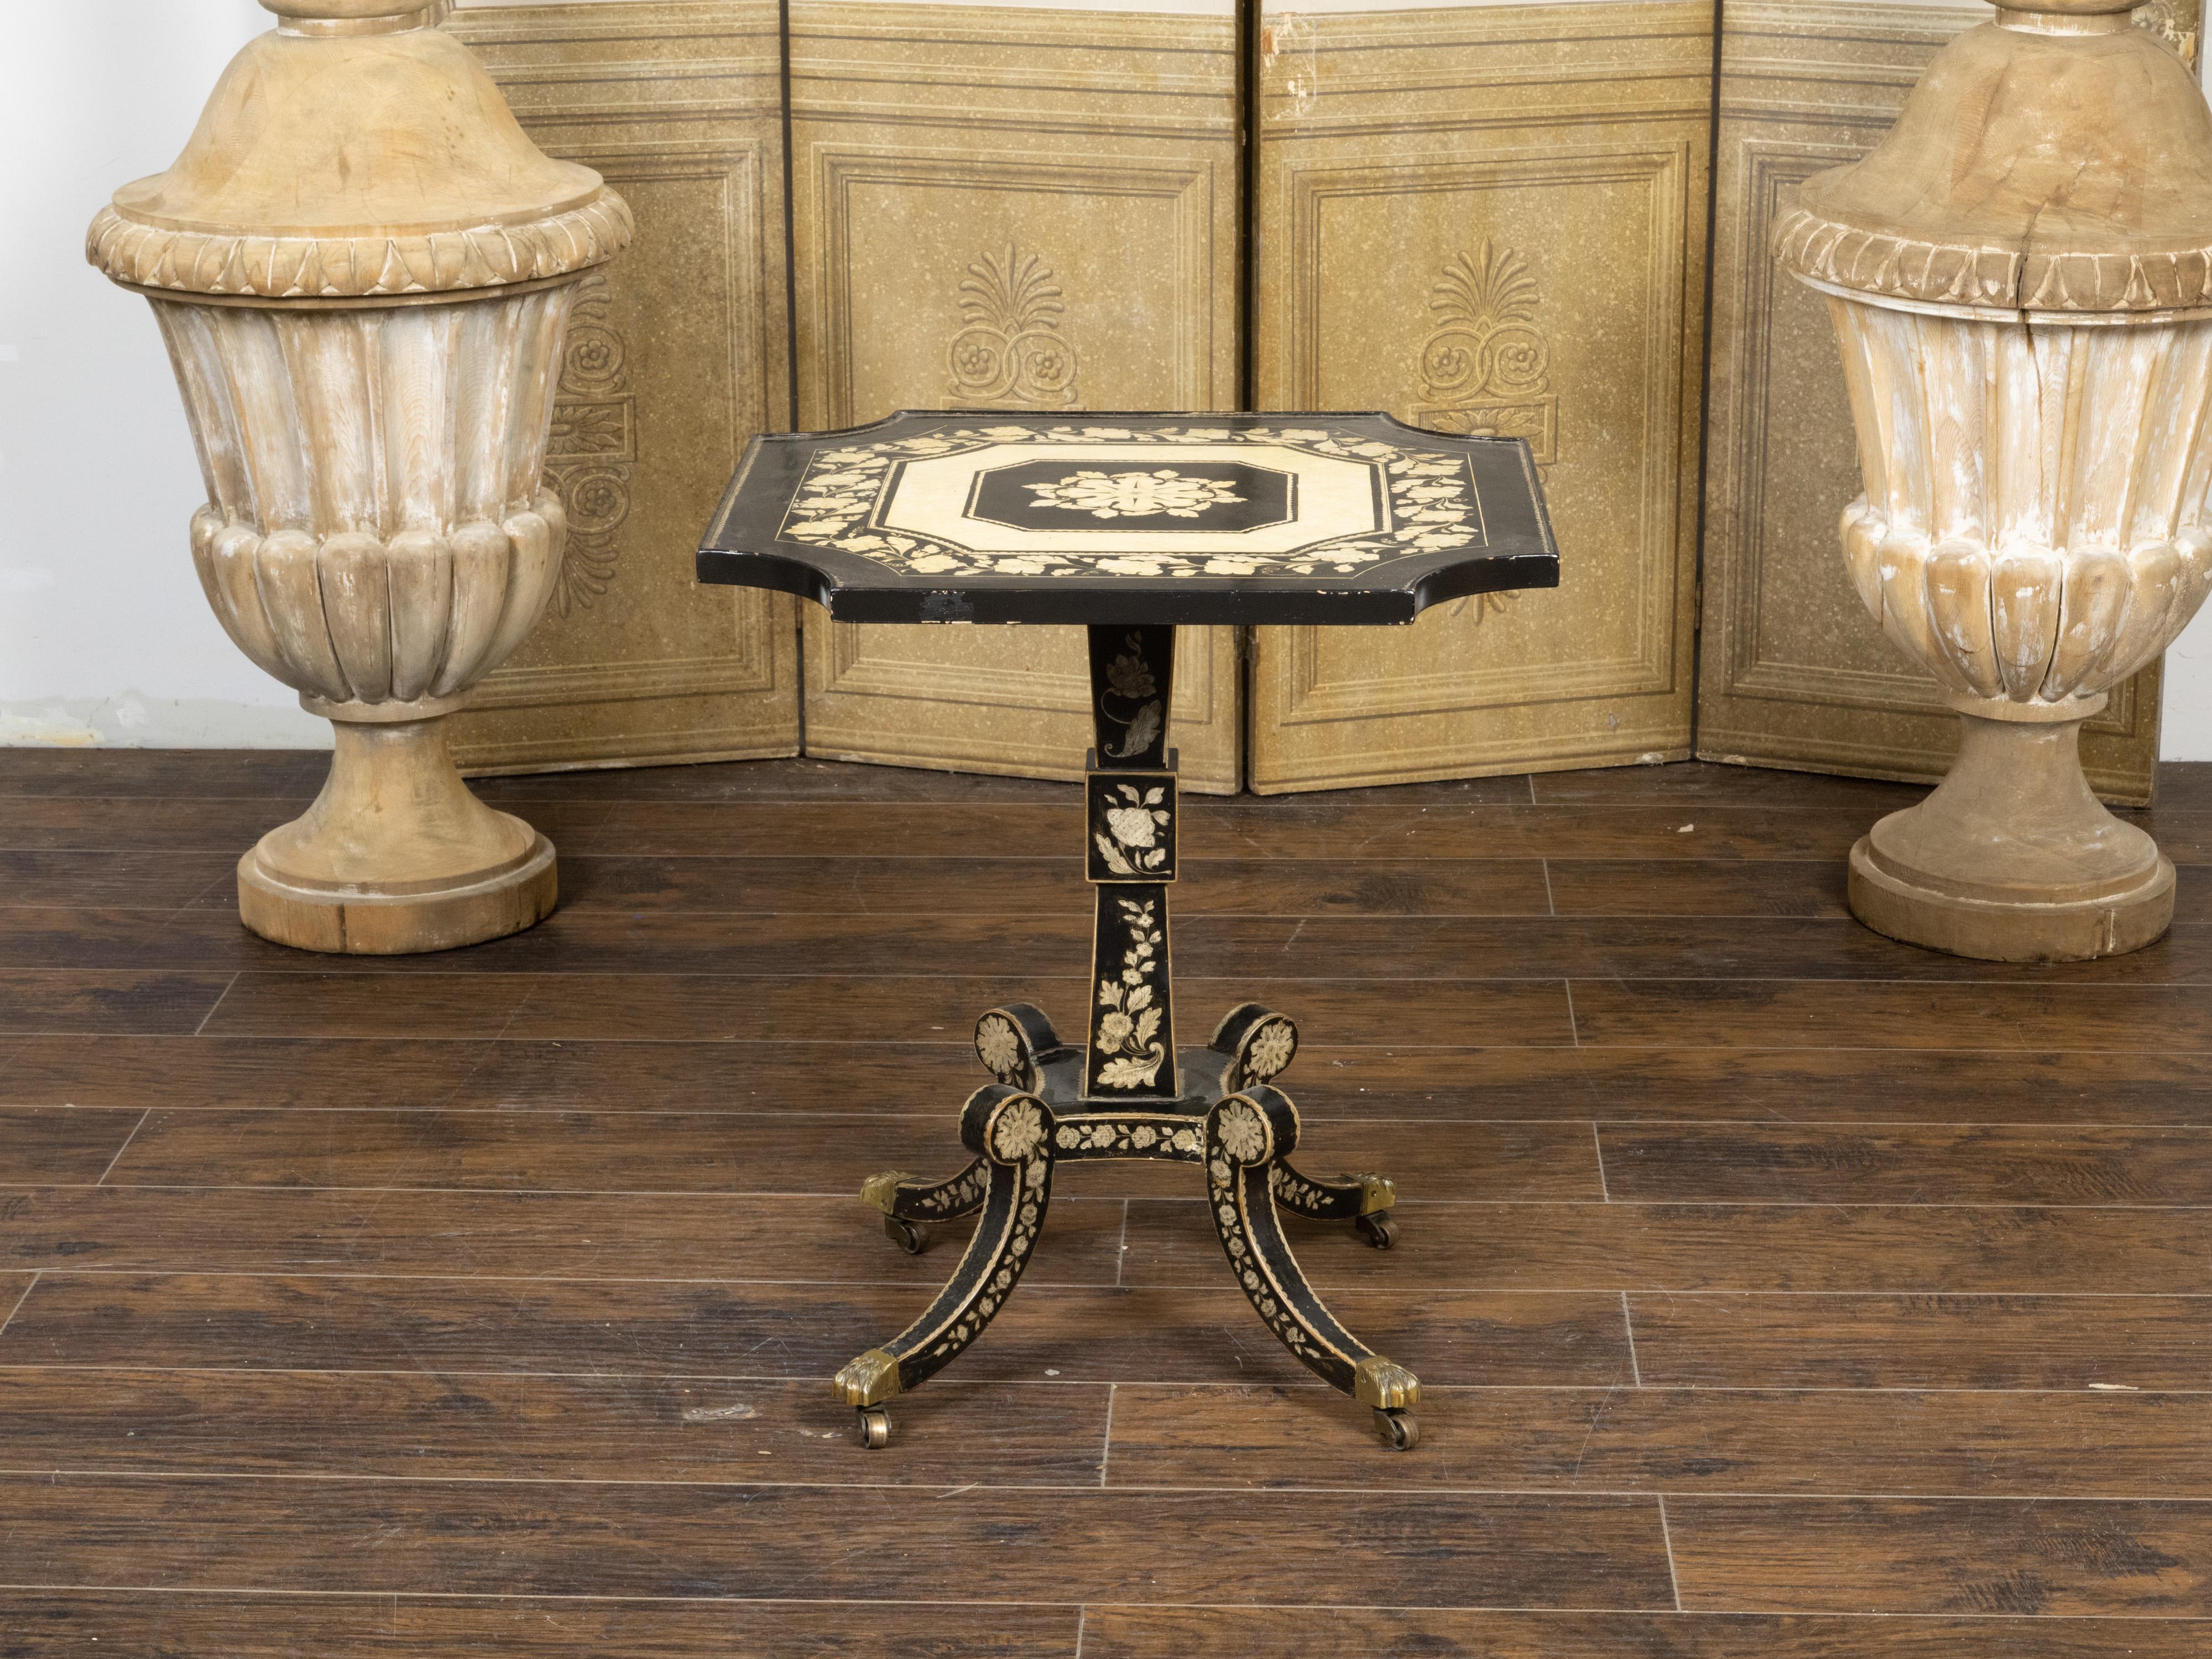 An English Regency penwork occasional table from the 19th century, with square top, in-curving accents, floral décor and quadripod base on casters. Created in England during the Regency period, this occasional table attracts our immediate attention